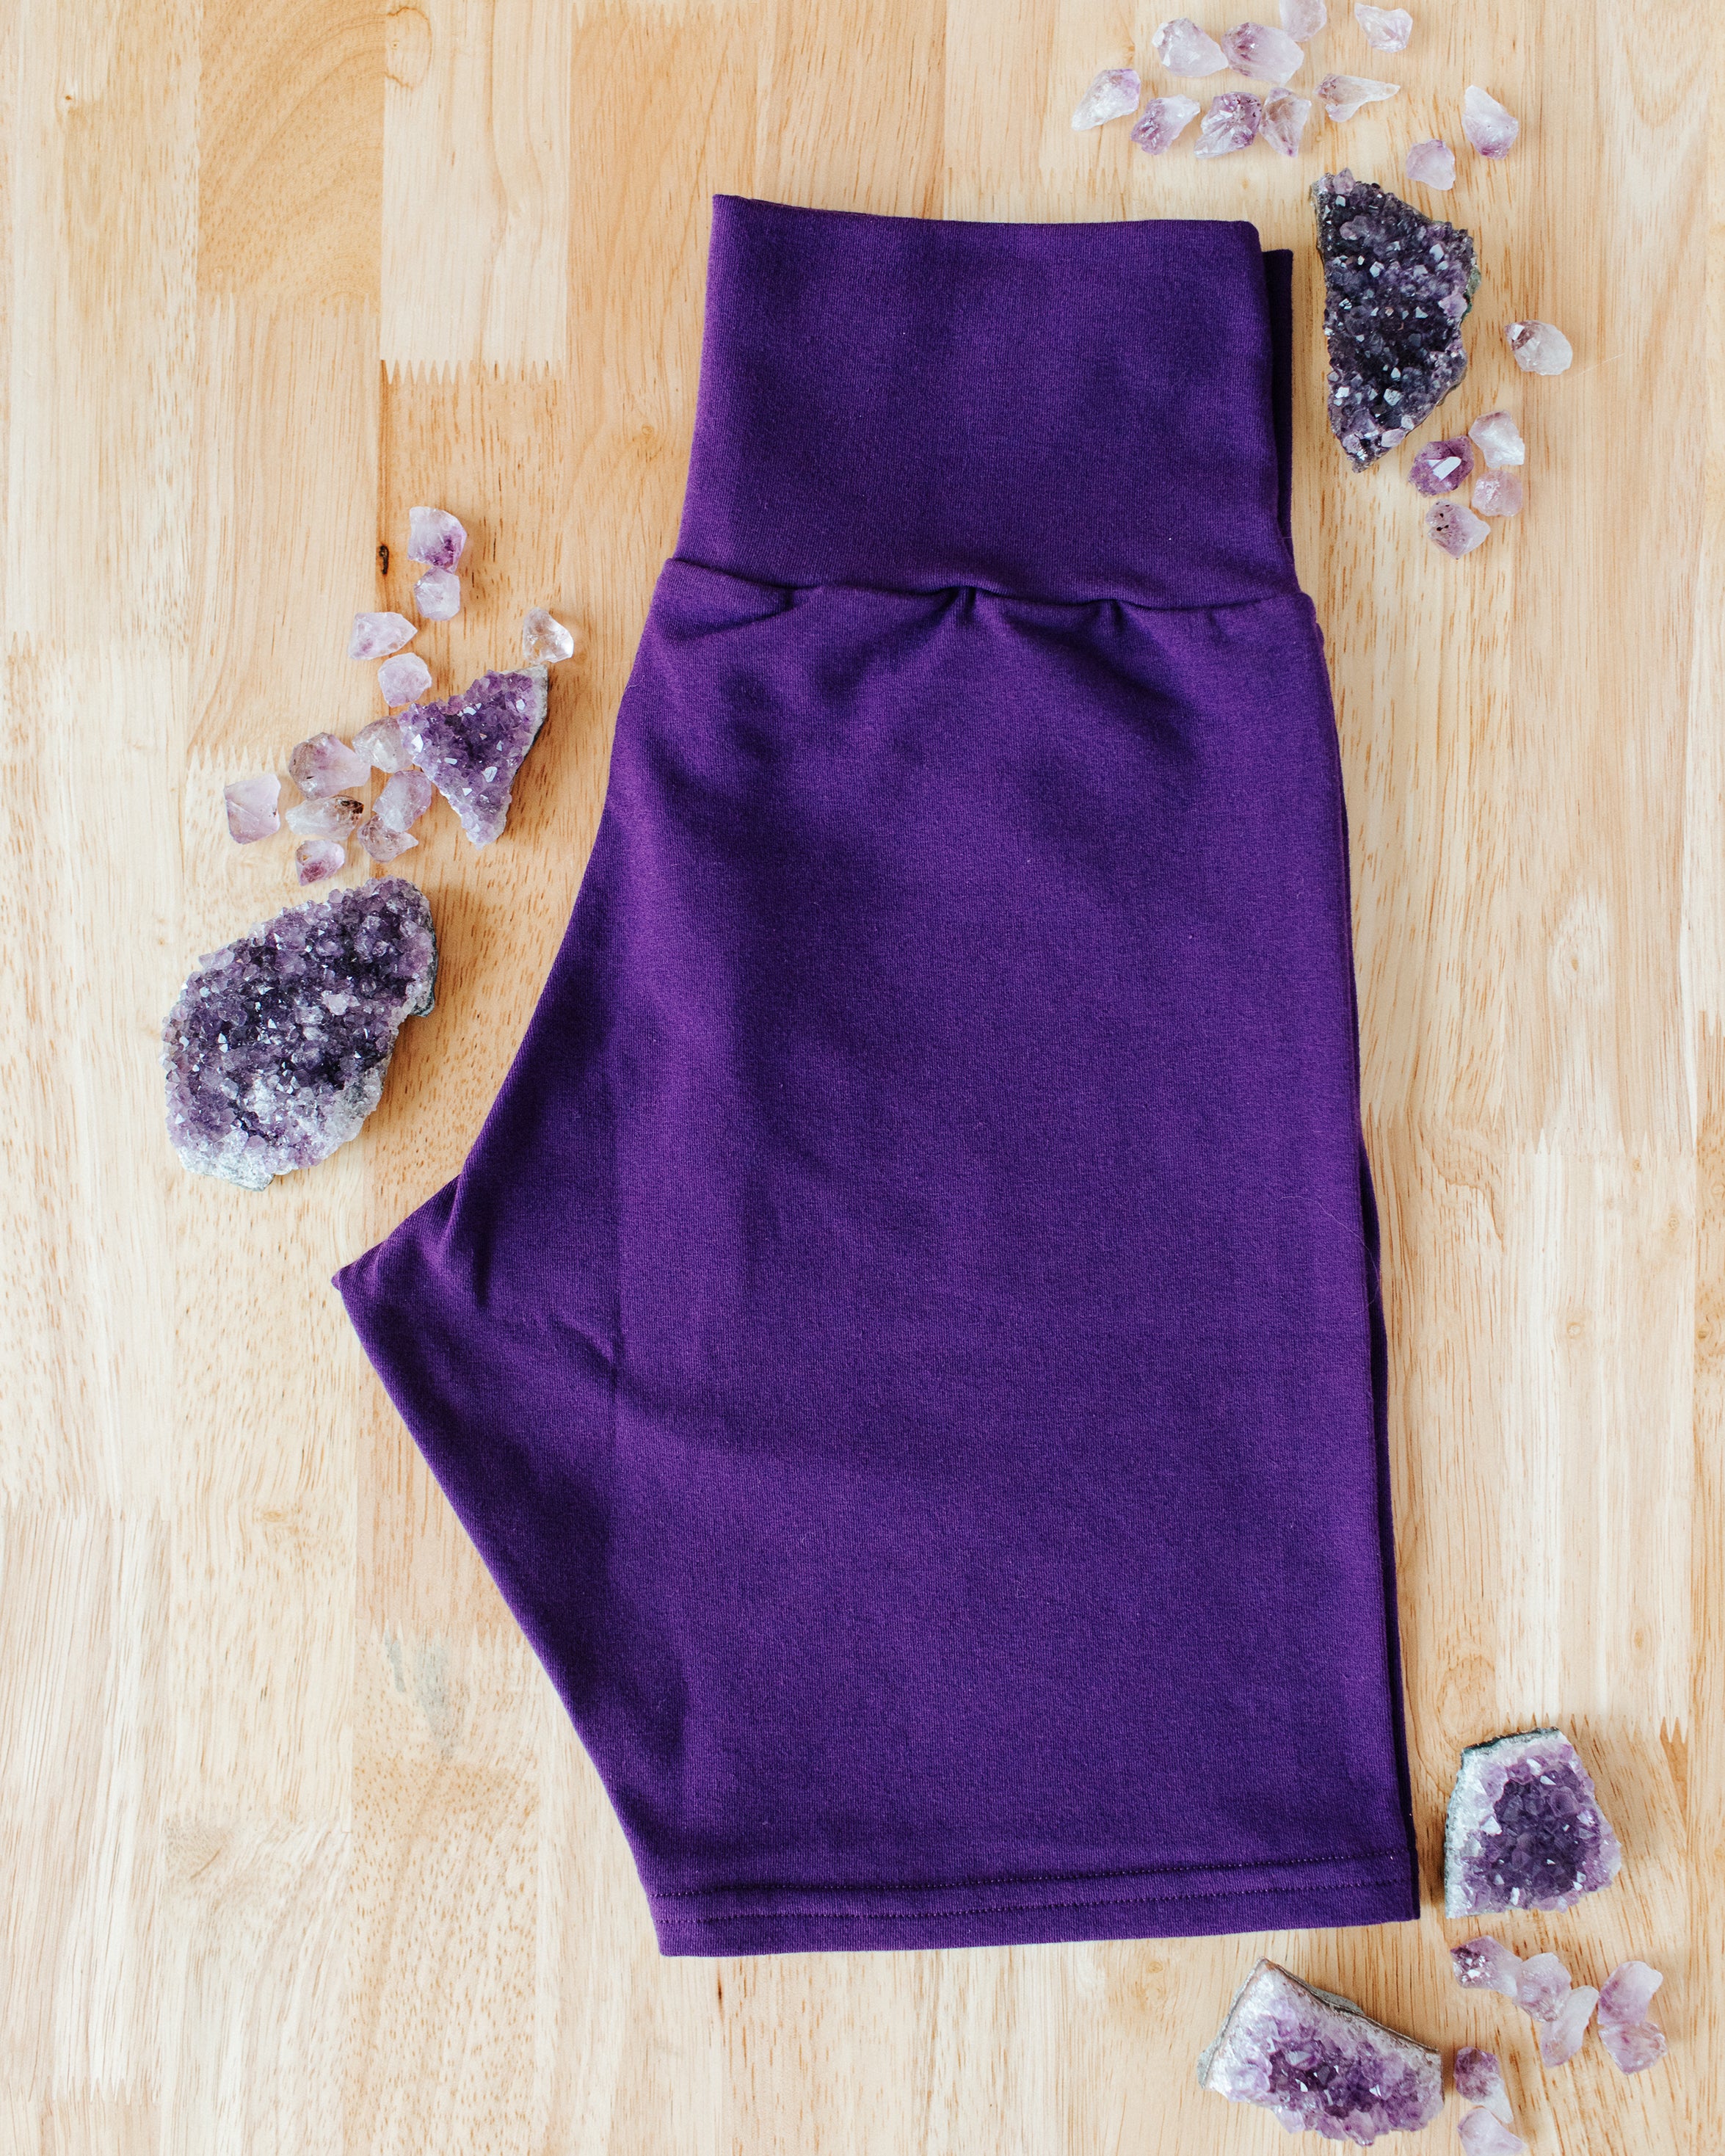 Flat lay of folded purple Deep Amethyst Bike Shorts on a wood surface with big and small amethyst stones surrounding it.